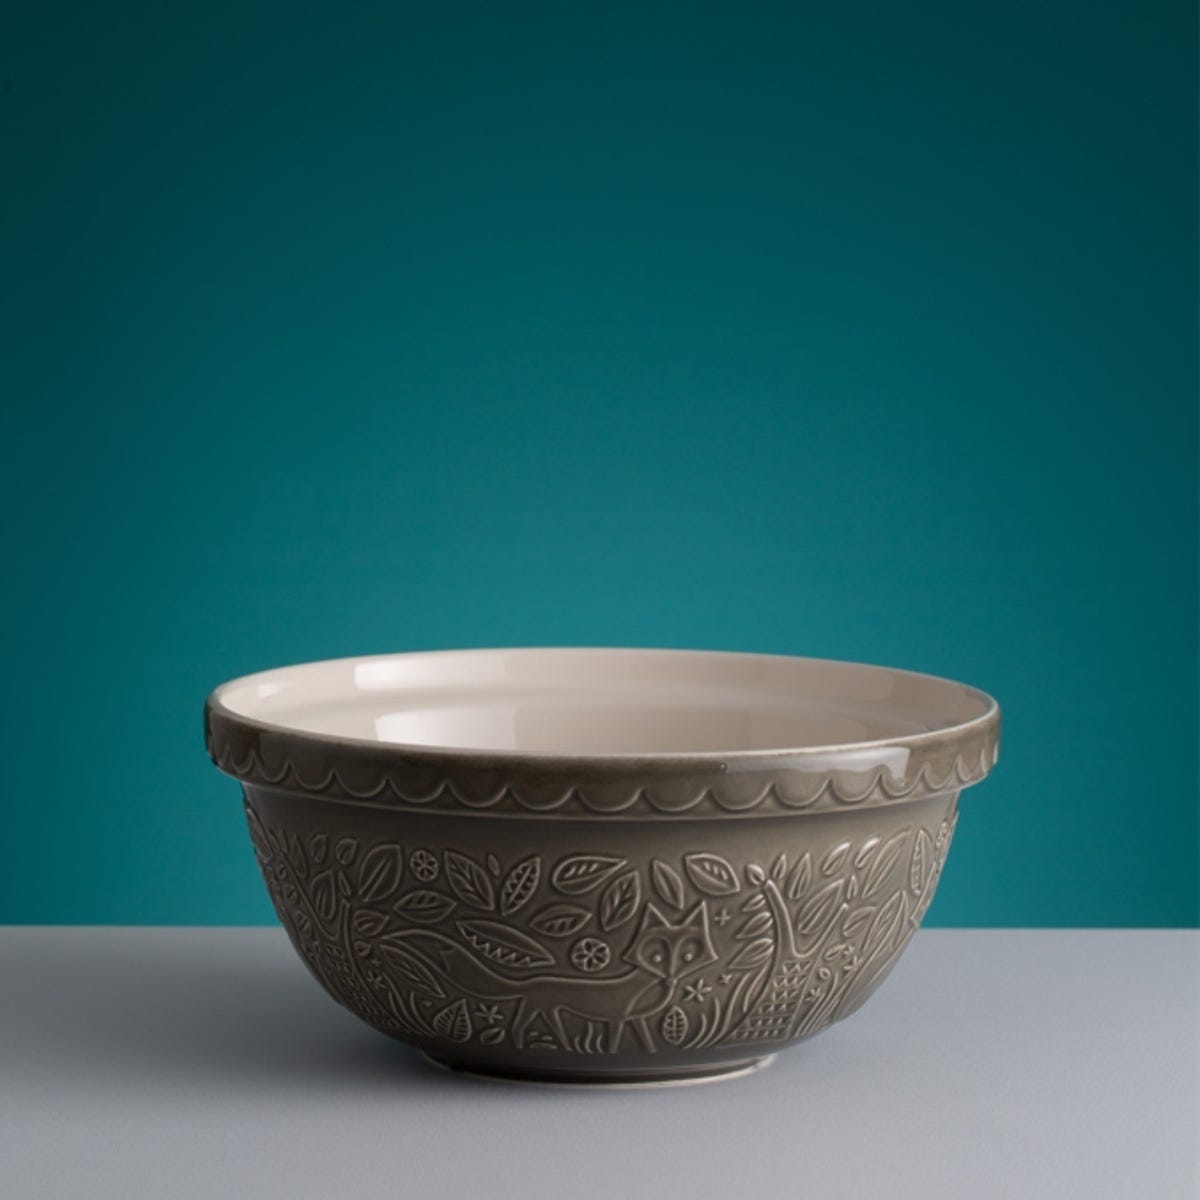 grey fox bowl on a table with a teal background.